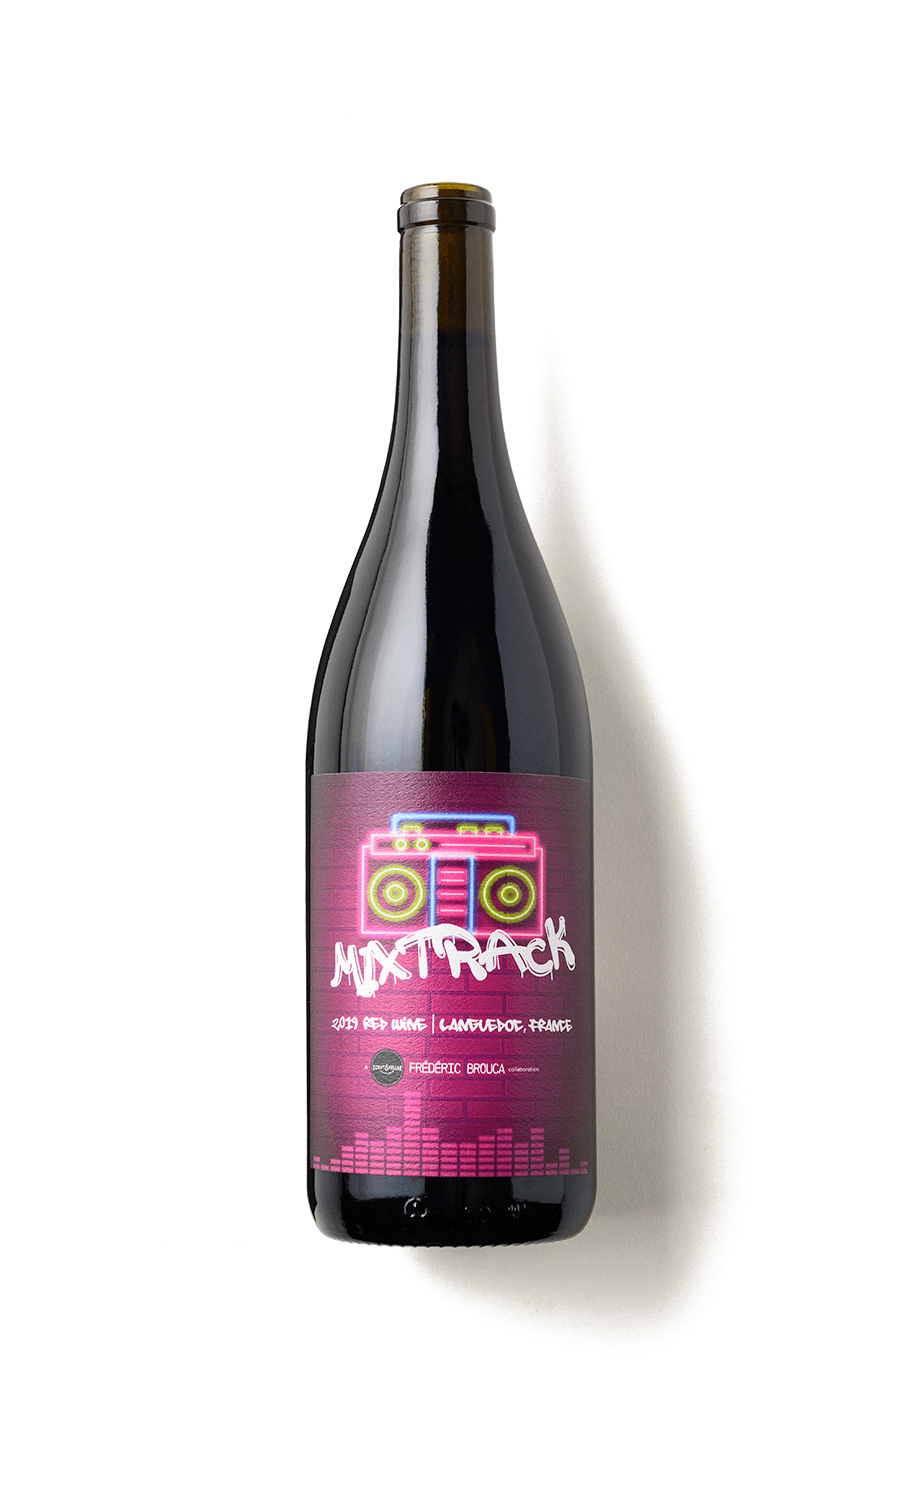 Bottle of Red Mixtrack Wine Brouca, description and wine pairing offered